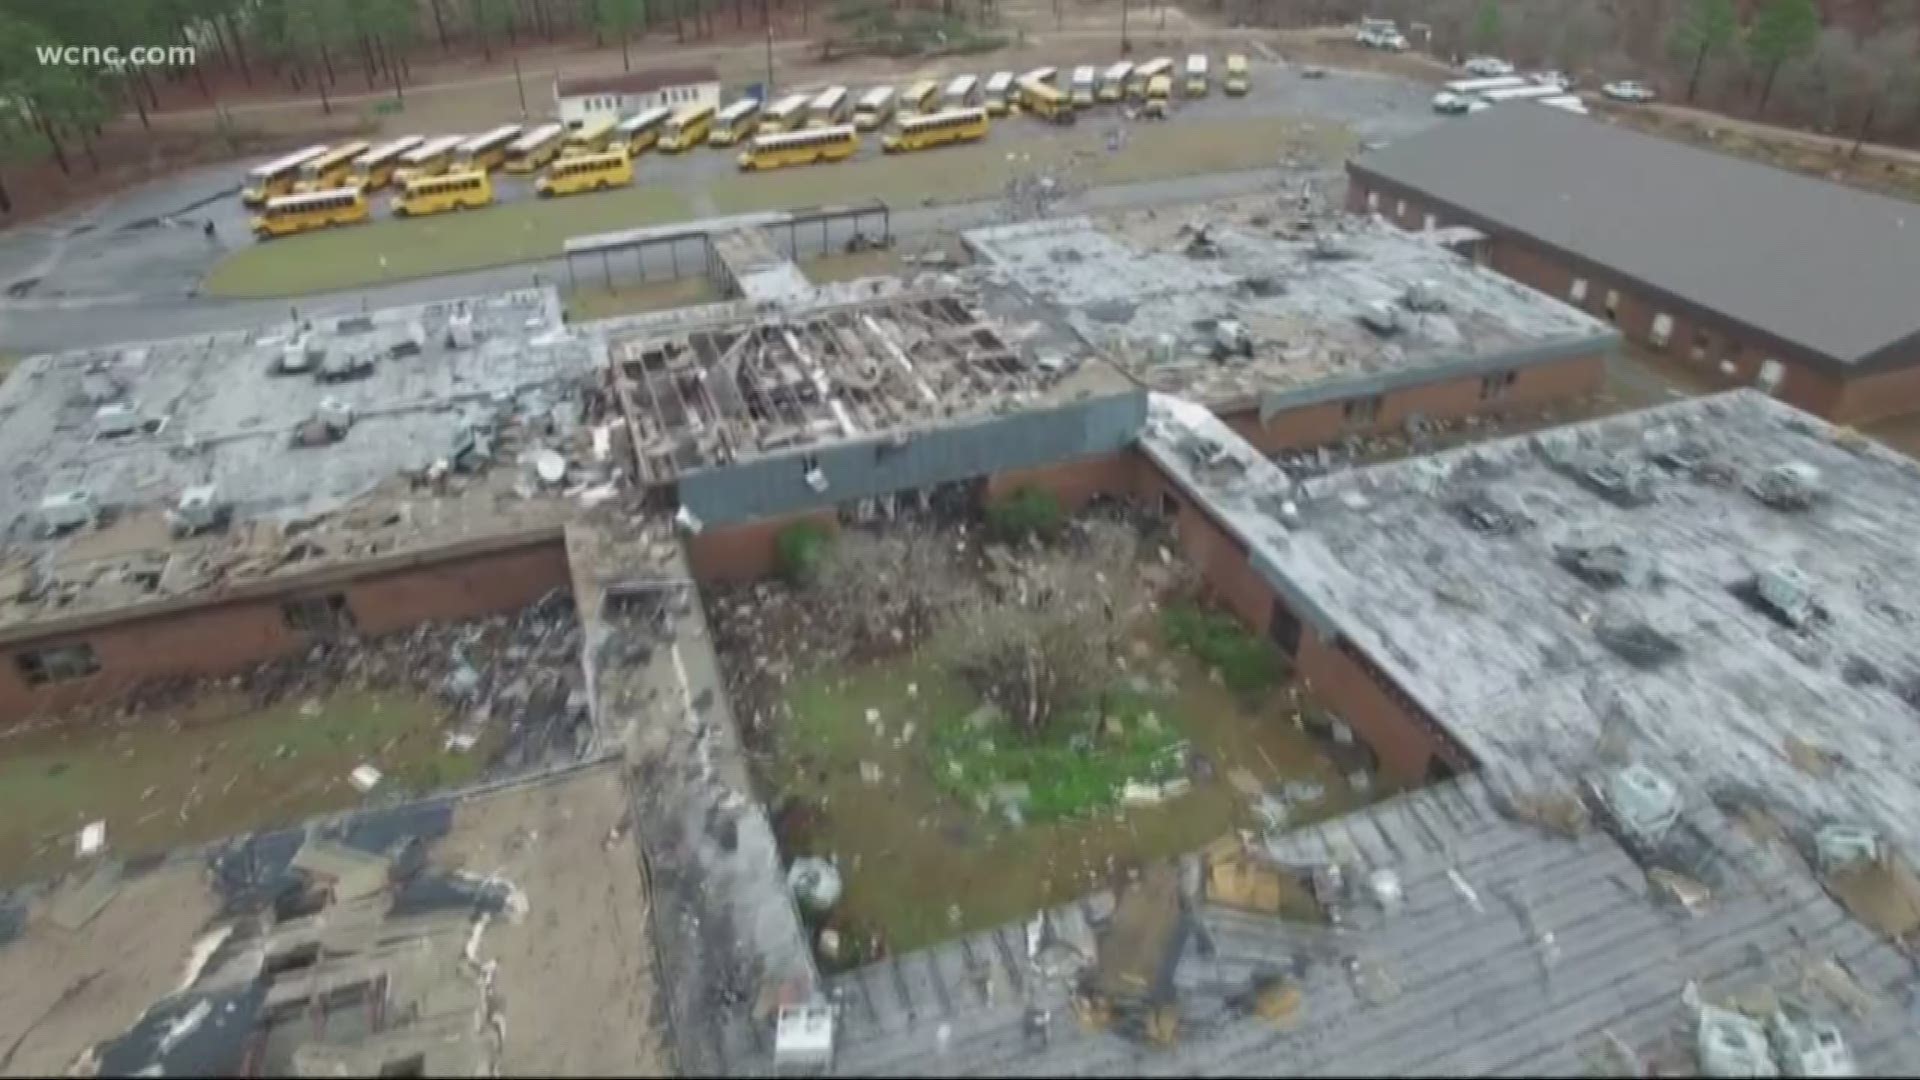 North Central High School in Kershaw, South Carolina was badly damaged when an EF-2 tornado hit the campus over the weekend.